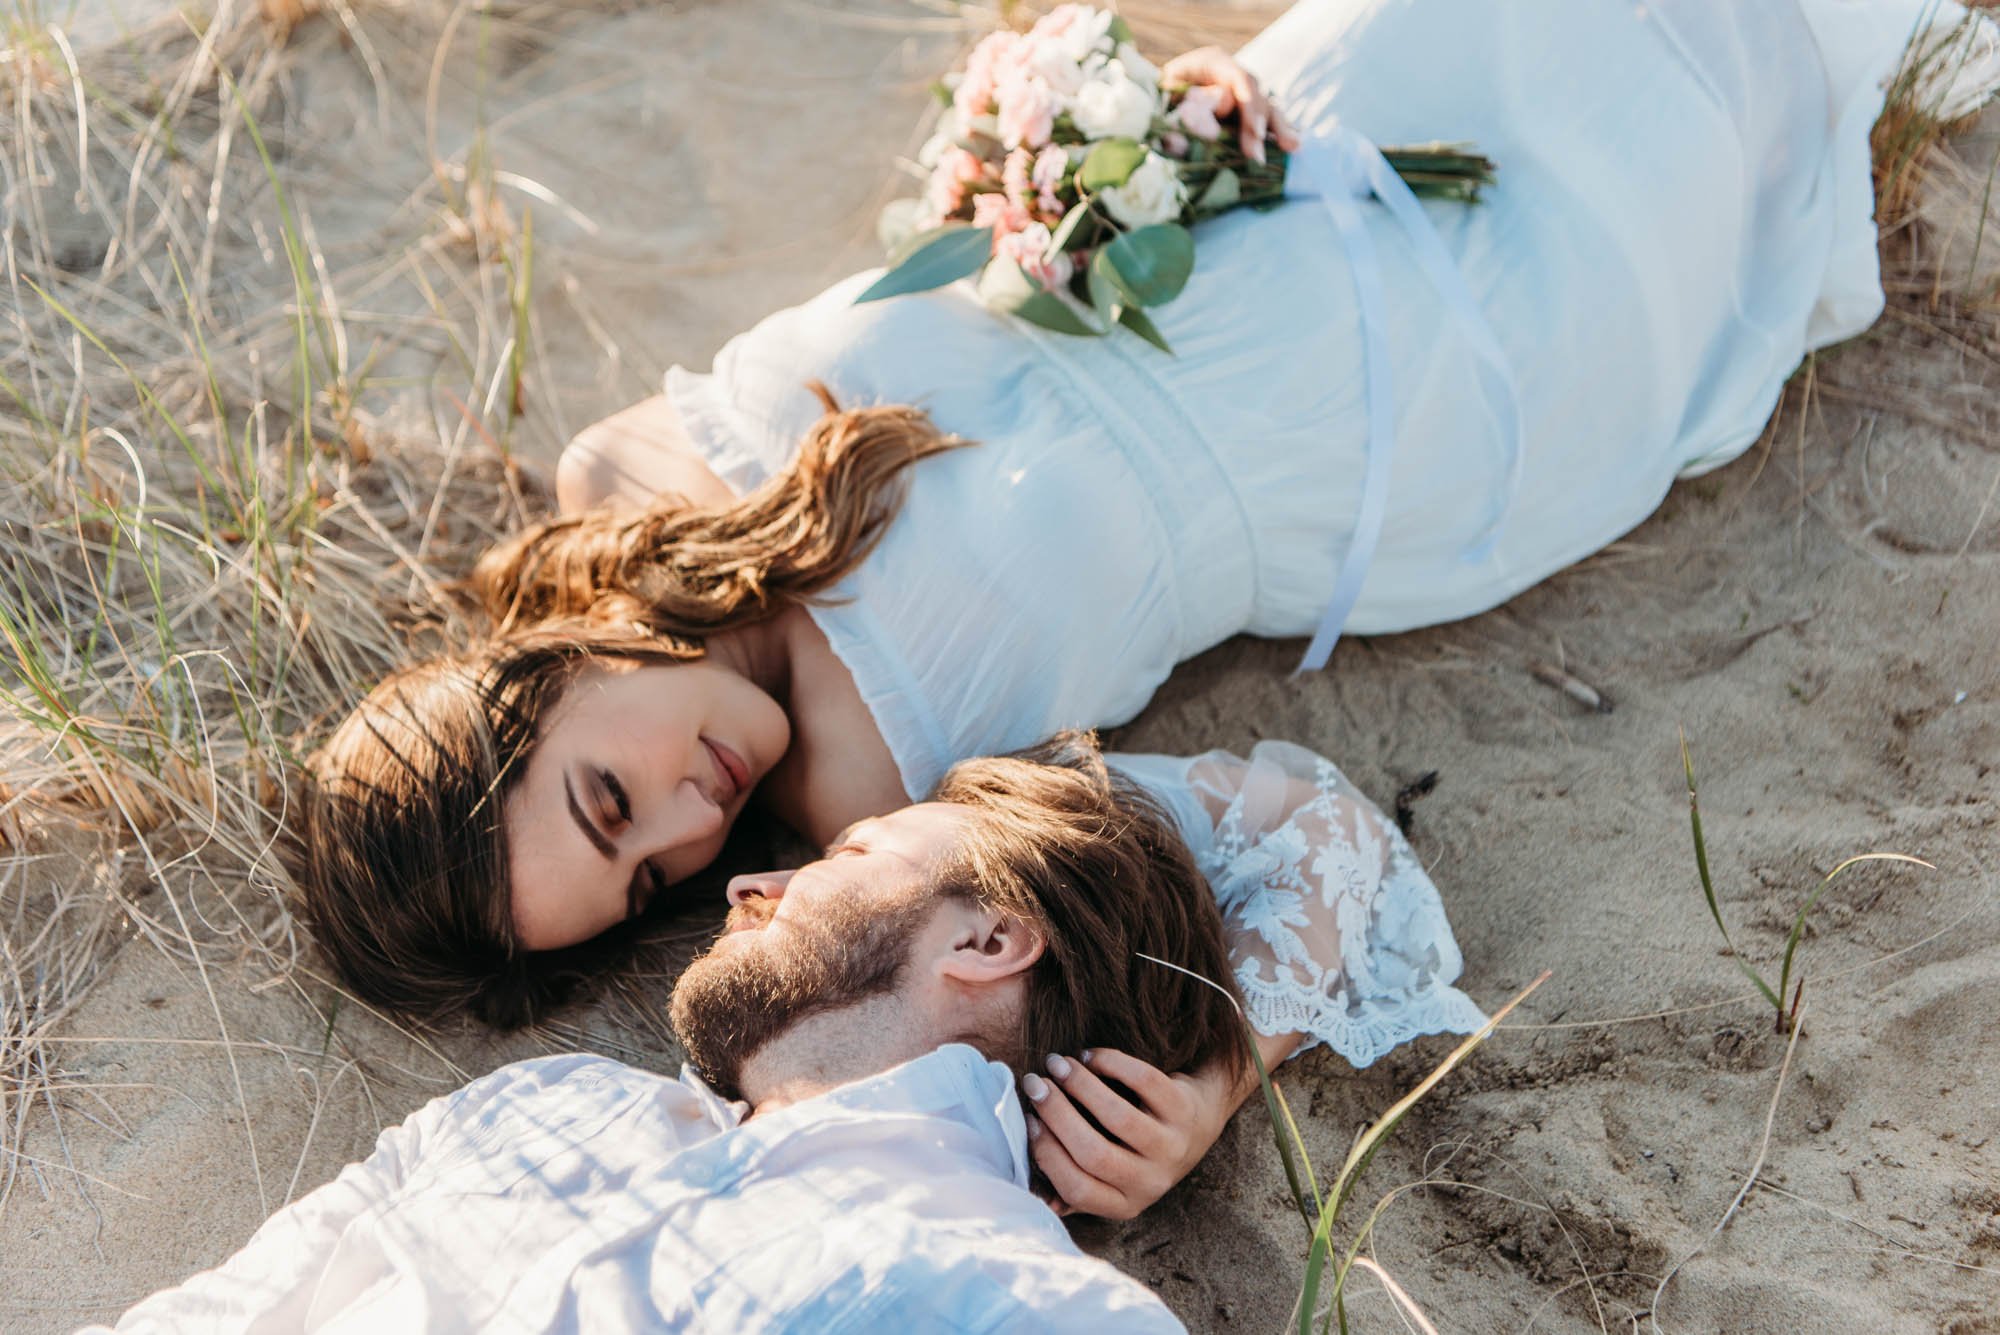 Eloping couple lies in the grass near the ocean before saying their vows. Visit www.loveplustravel.com to book your elopement photographer.